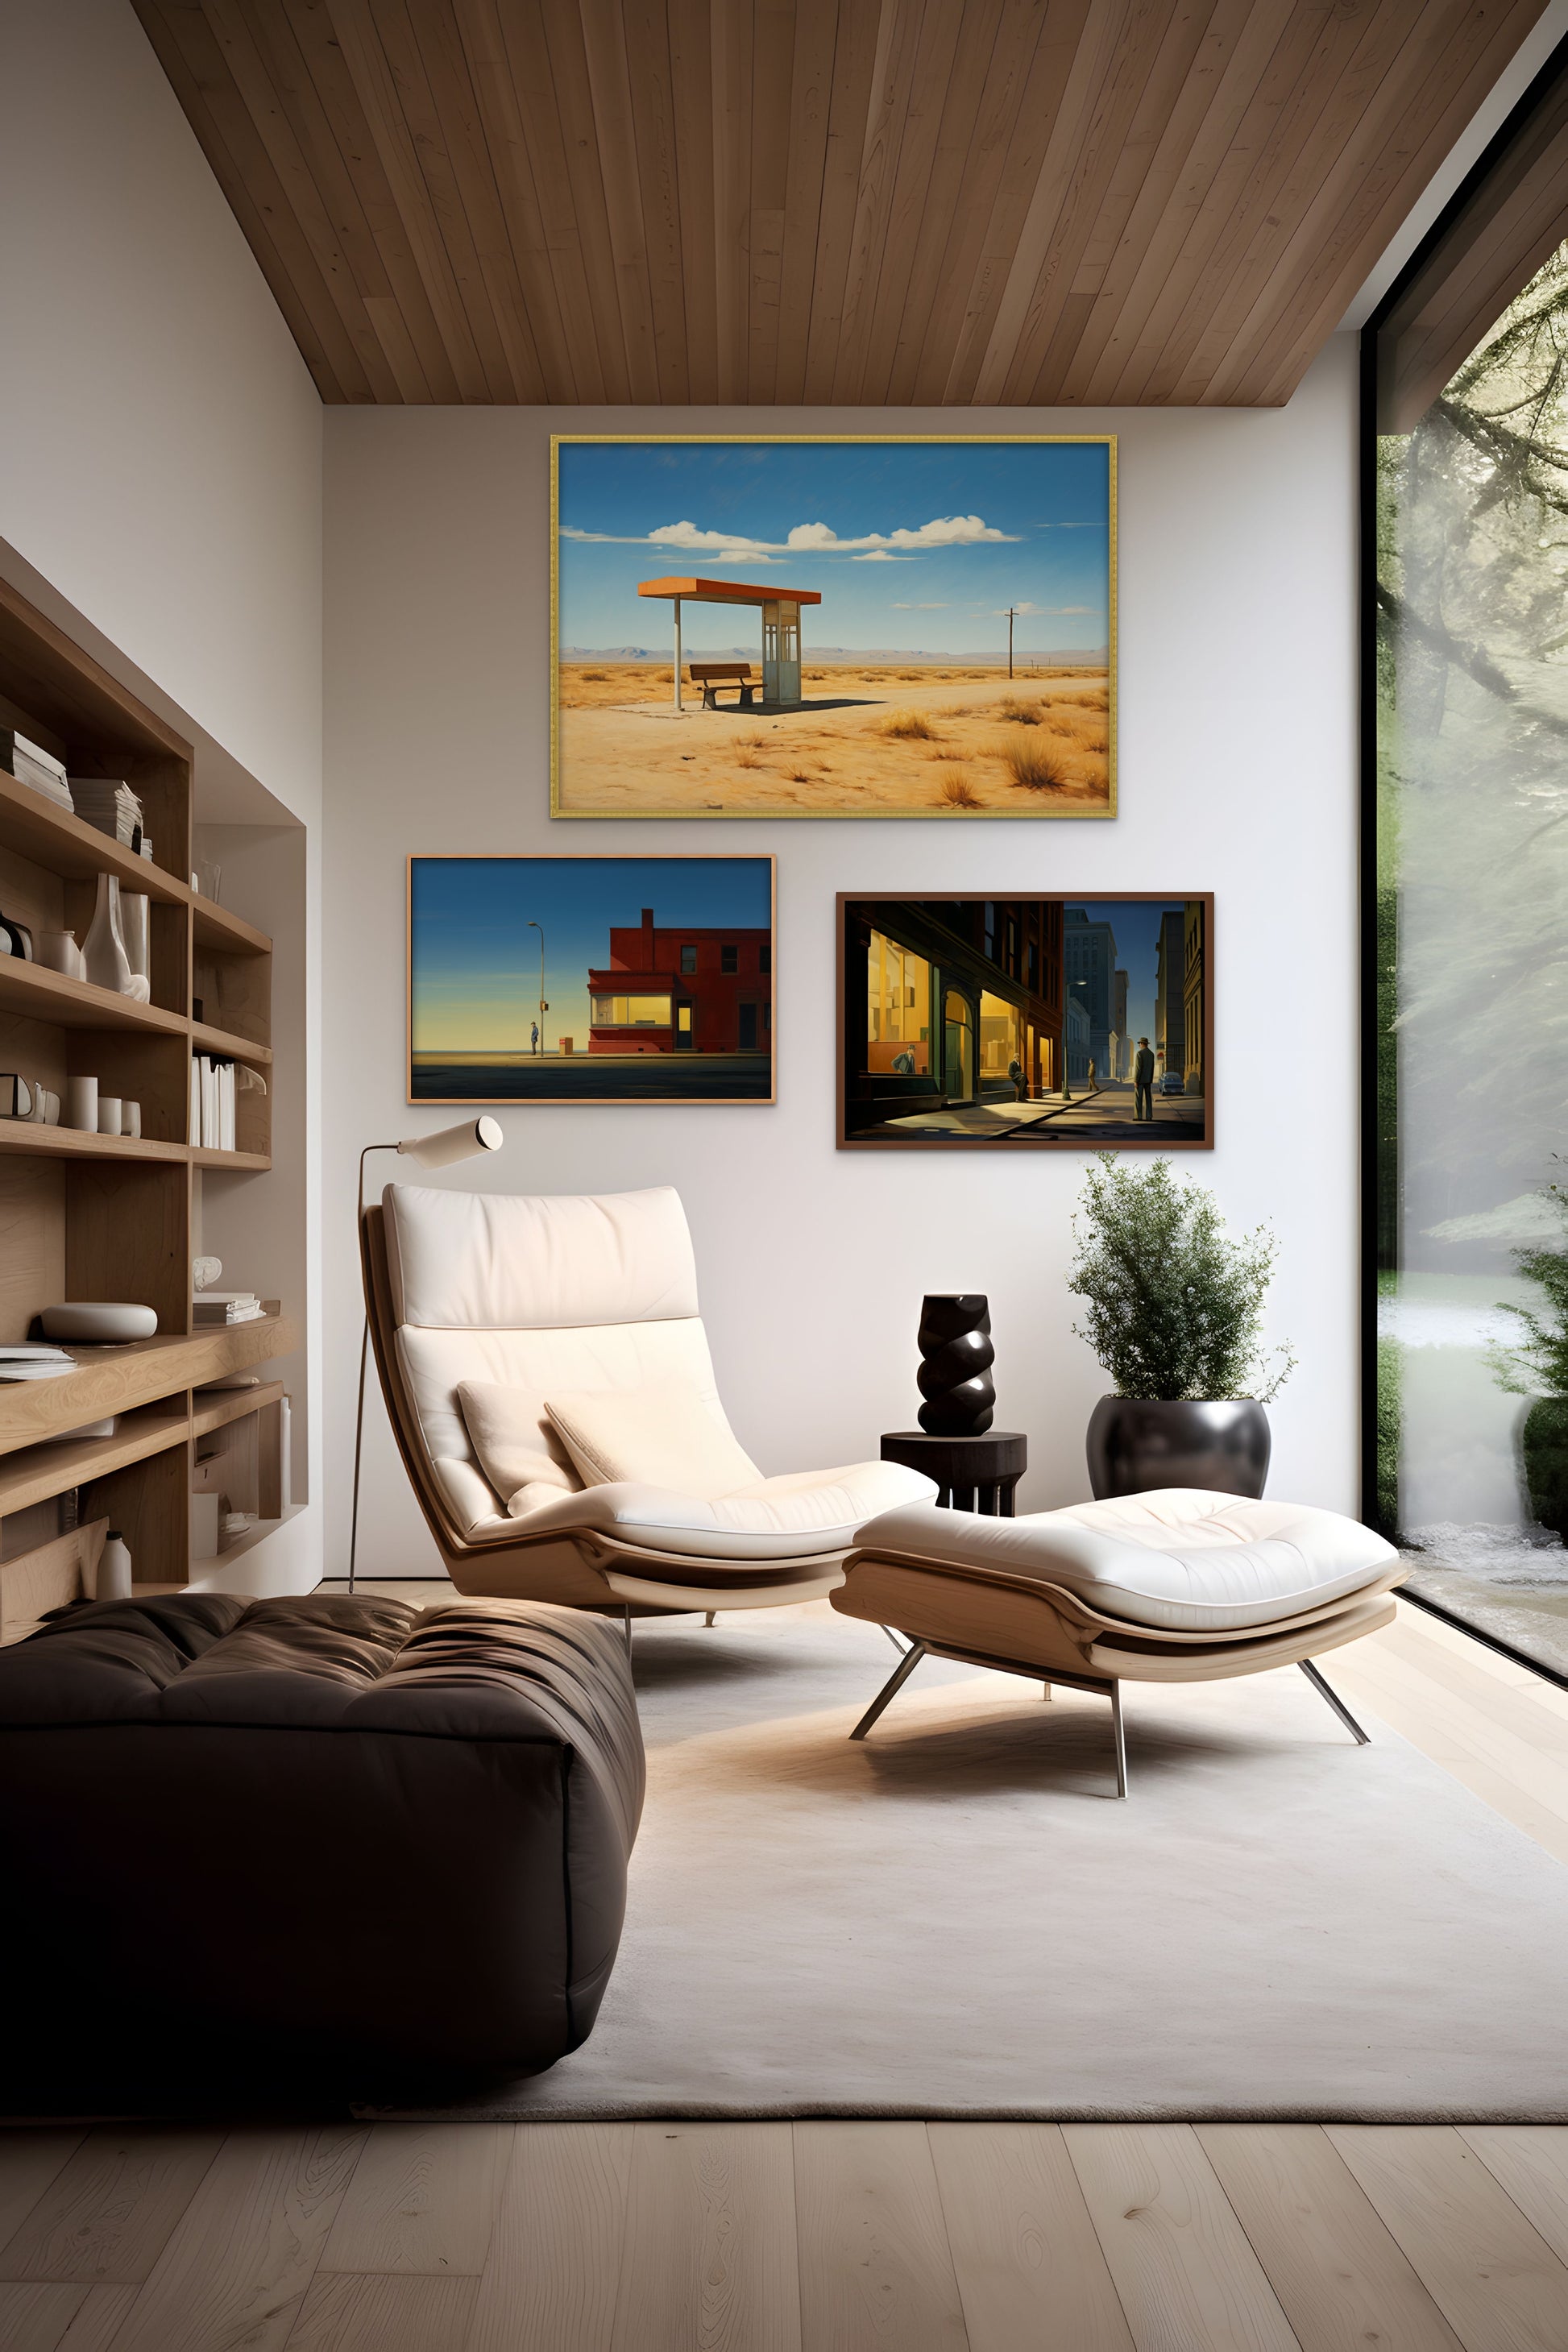 A modern living room with a chair, ottoman, artwork on walls, and a snowy view outside.